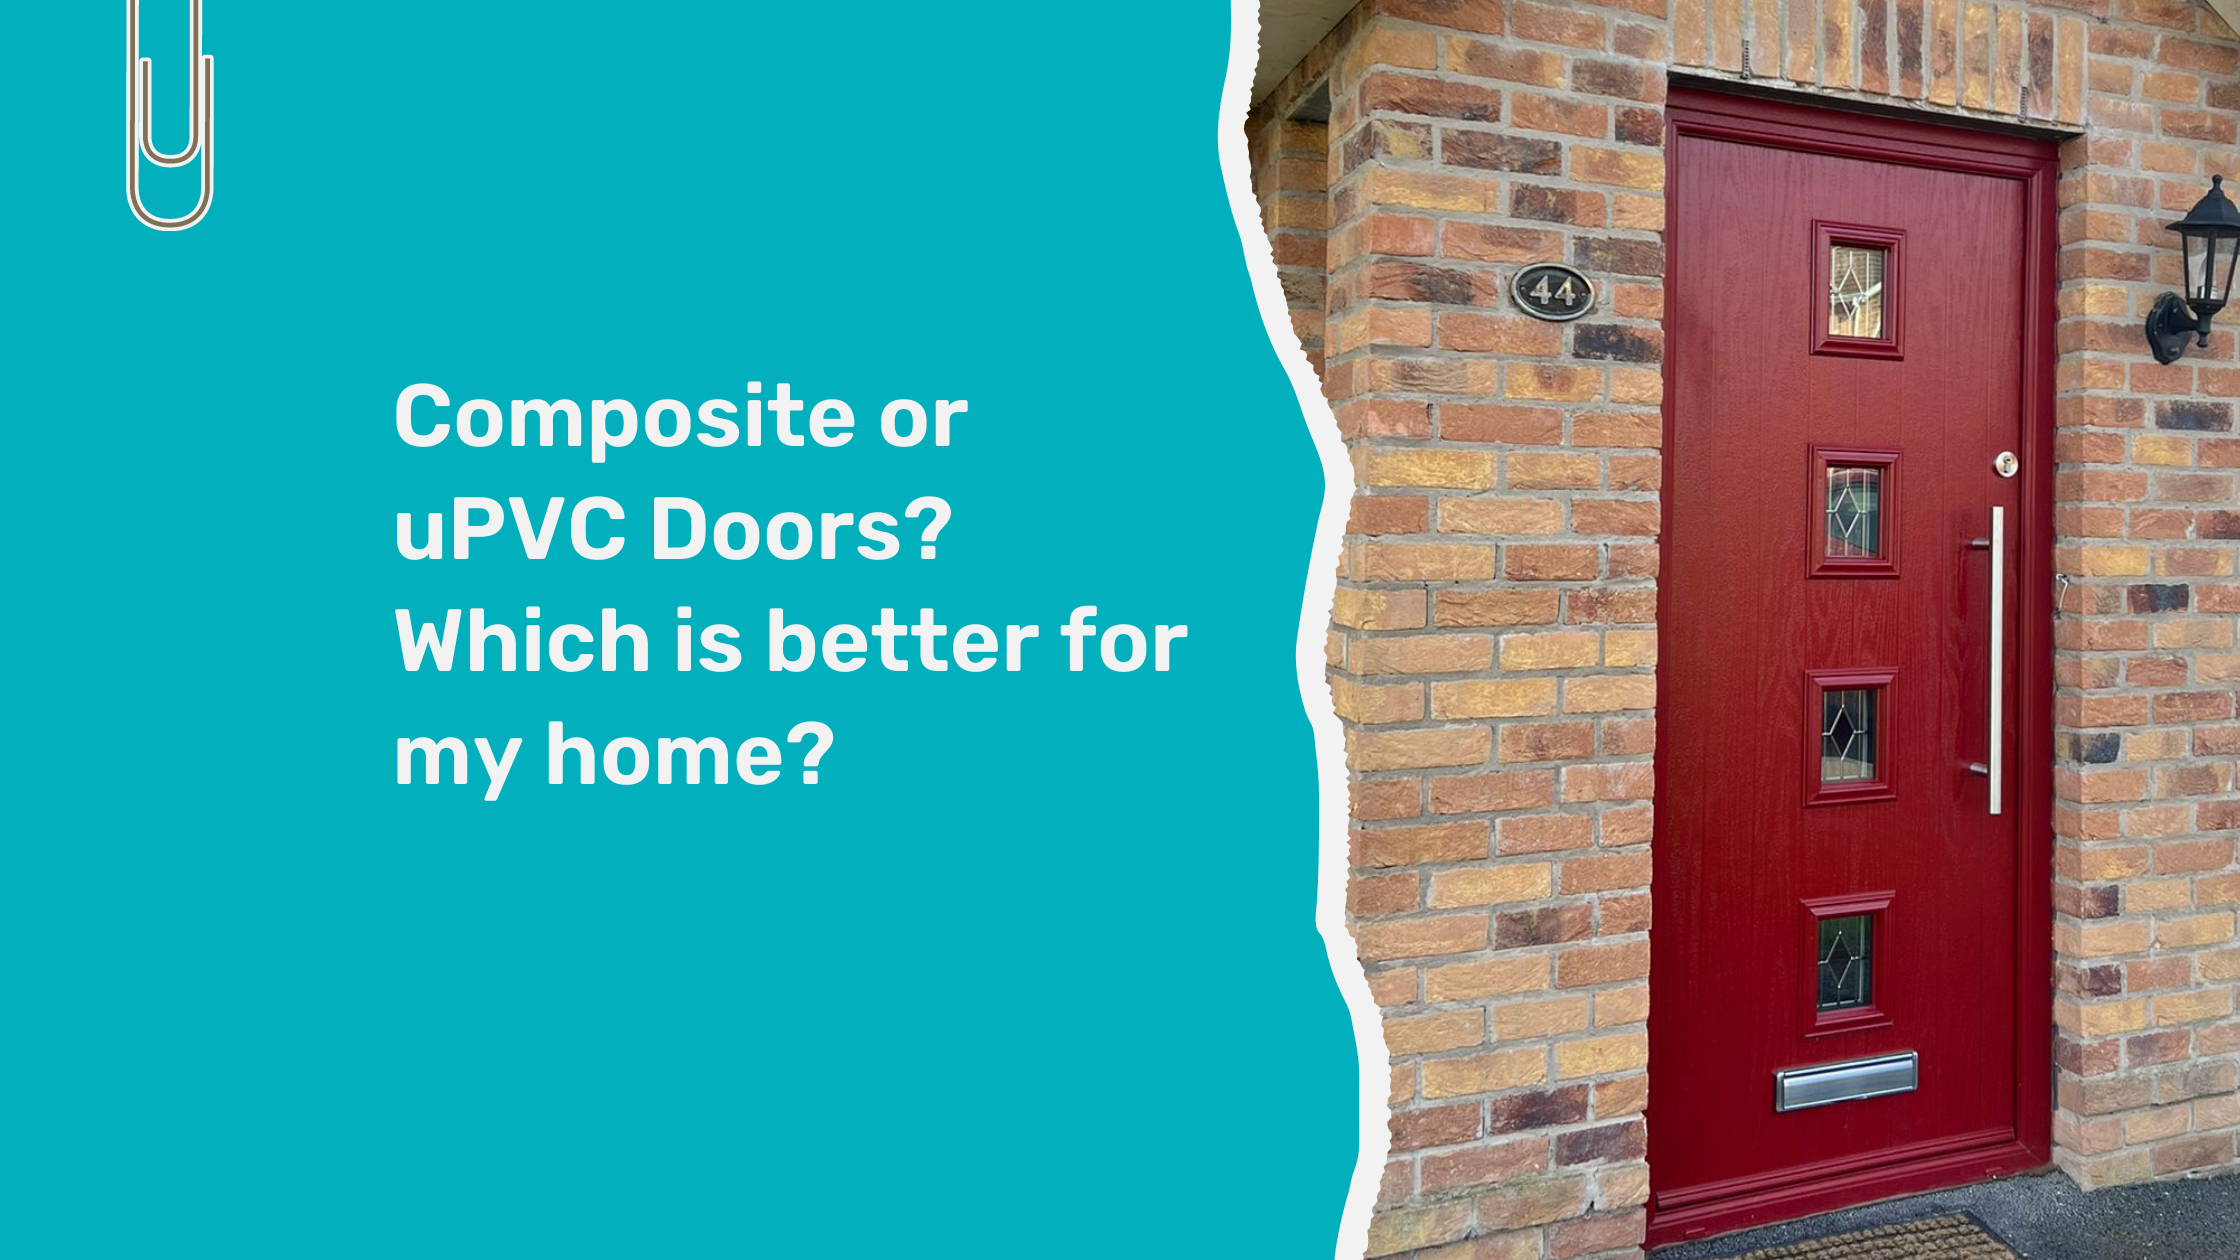 Composite or uPVC Doors, which is better for your Home?